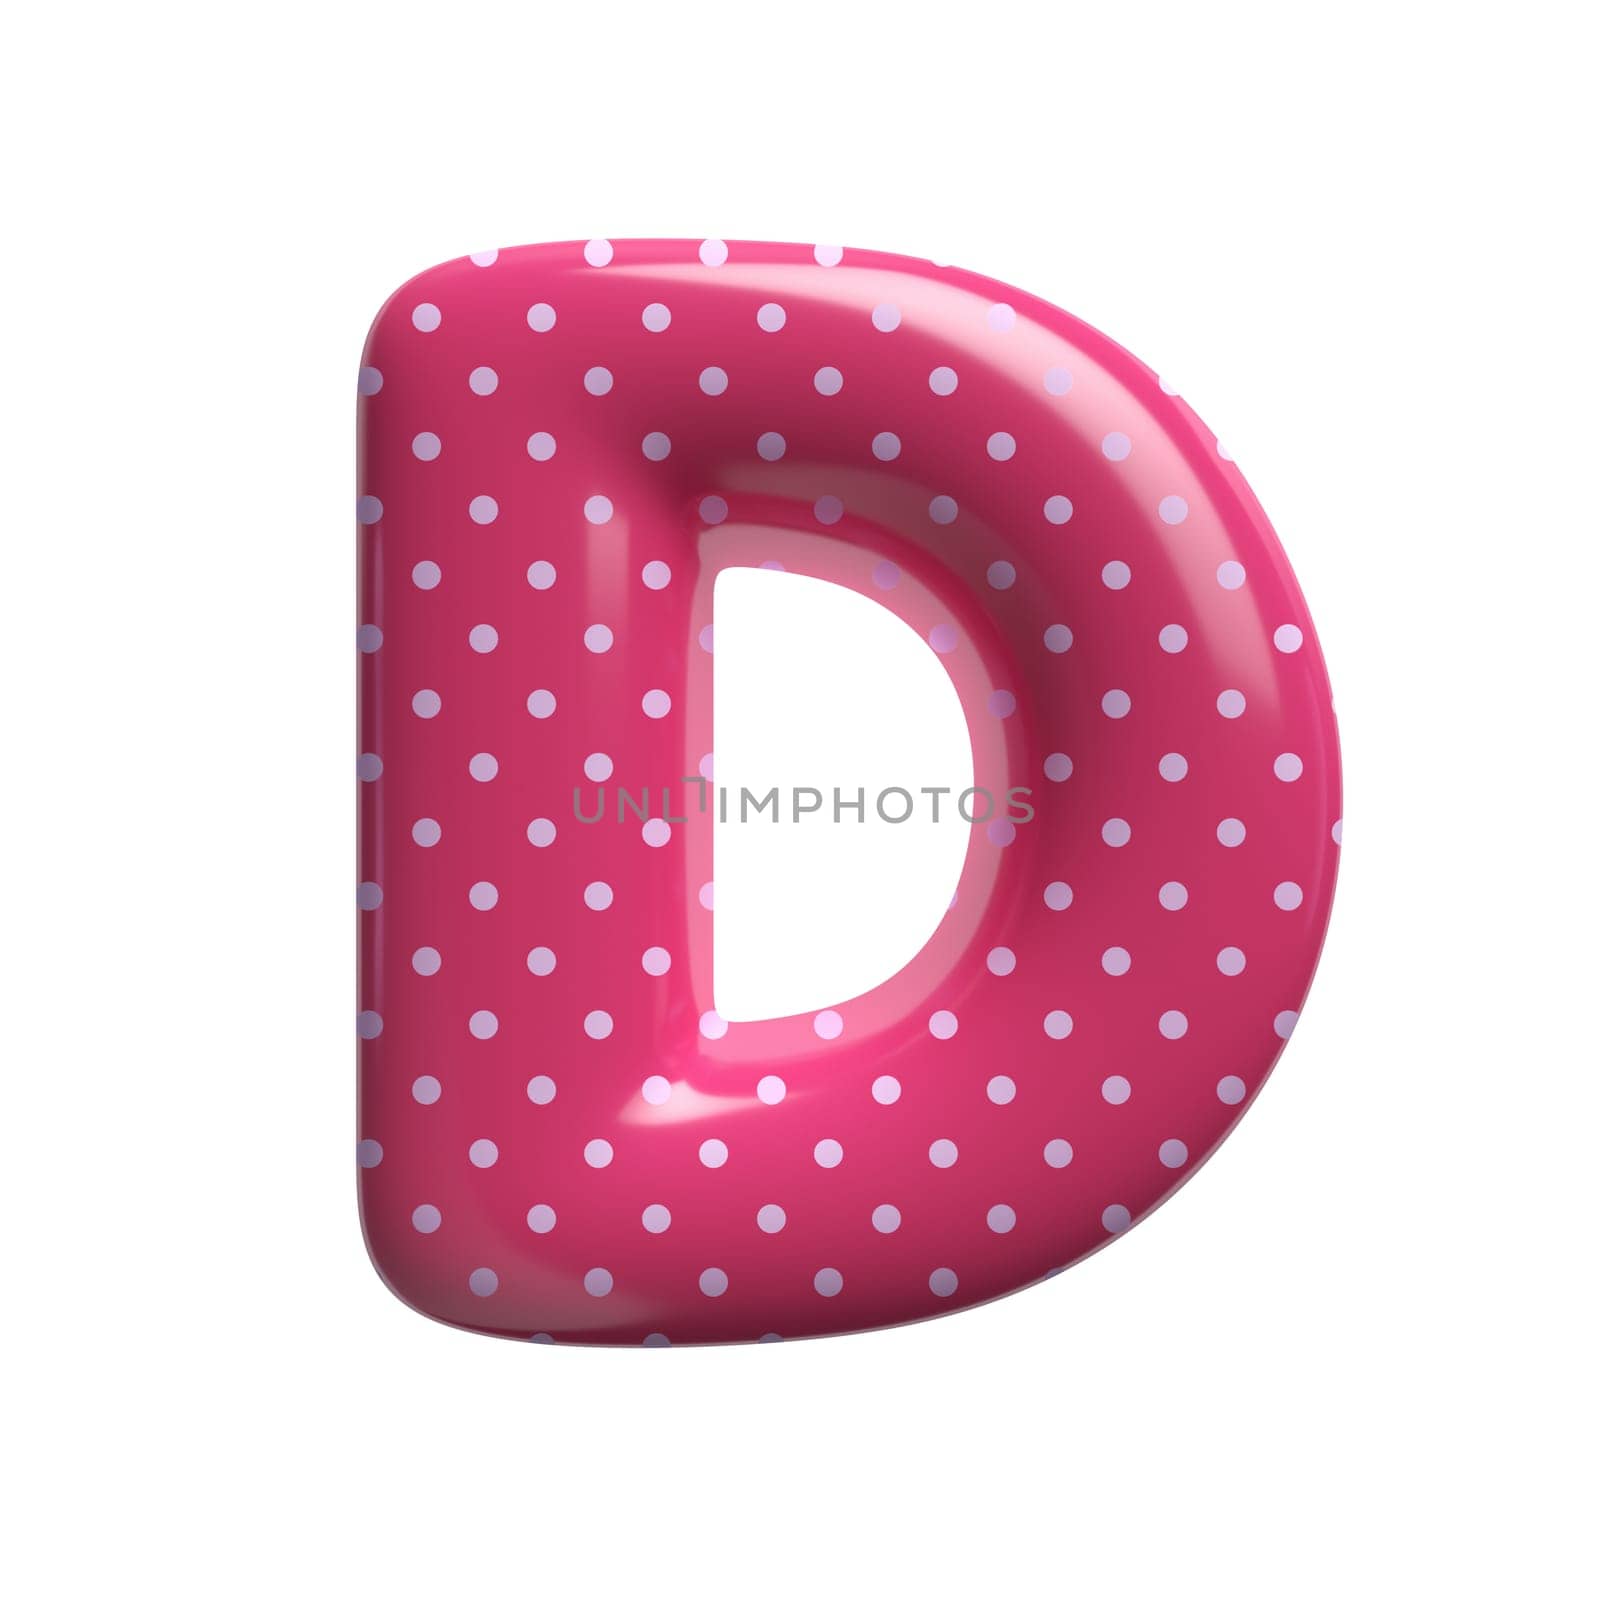 Polka dot letter D - Capital 3d pink retro font - suitable for Fashion, retro design or decoration related subjects by chrisroll